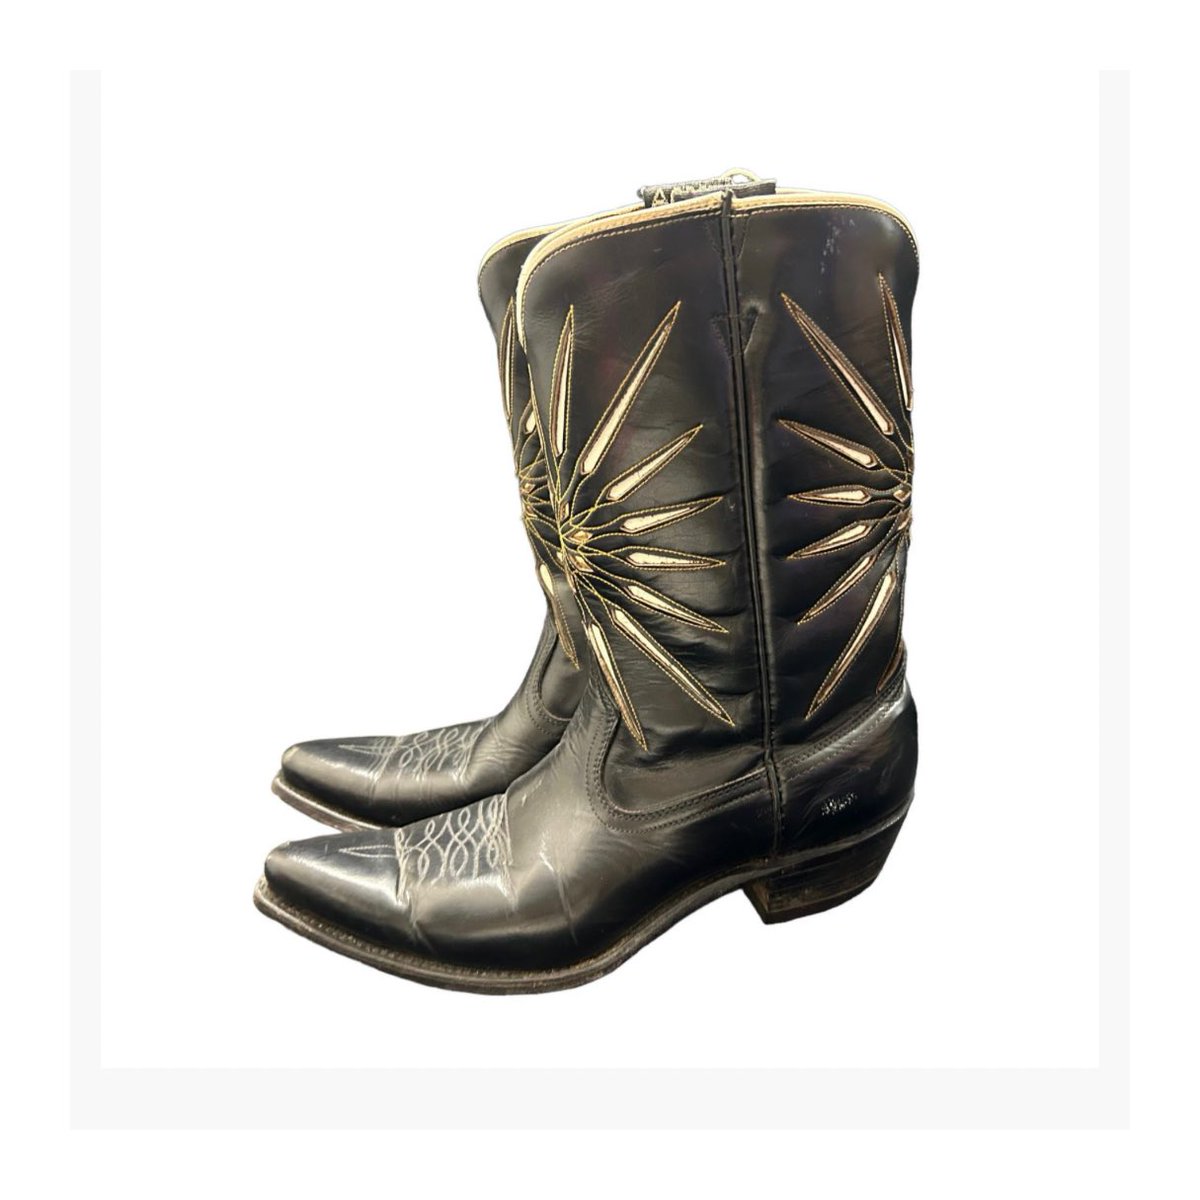 🤠 Take a peek at these groovy 1970s boots by Acme, the reigning kings of cowboy boot production from the 1940s to the 1980s, strutting their stuff in our upcoming Textiles & Fashion Auction on June 5th Further entries welcome 📧 vewart@hansonsauctioneers.co.uk #vintagestyle